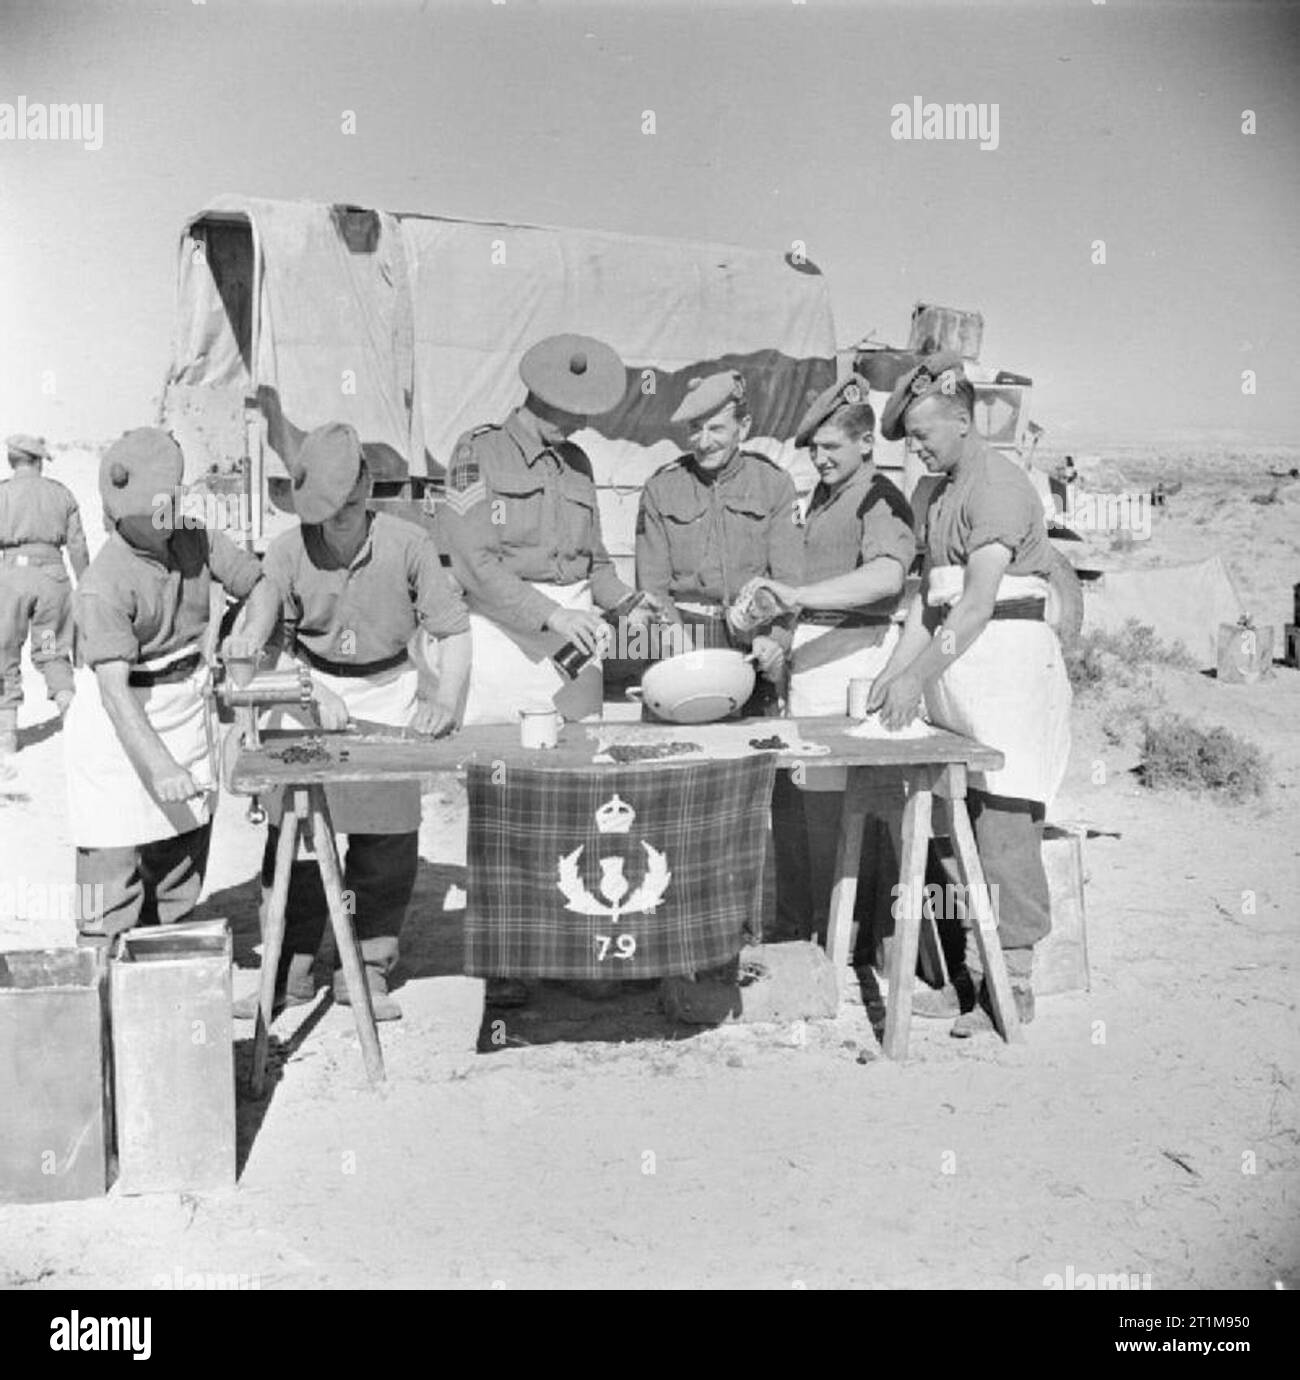 The British Army in North Africa 1942 The Regimental Sergeant Major and other members of the 5th Cameron Highlanders preparing Christmas puddings in the Western Desert, 28 December 1942. Stock Photo